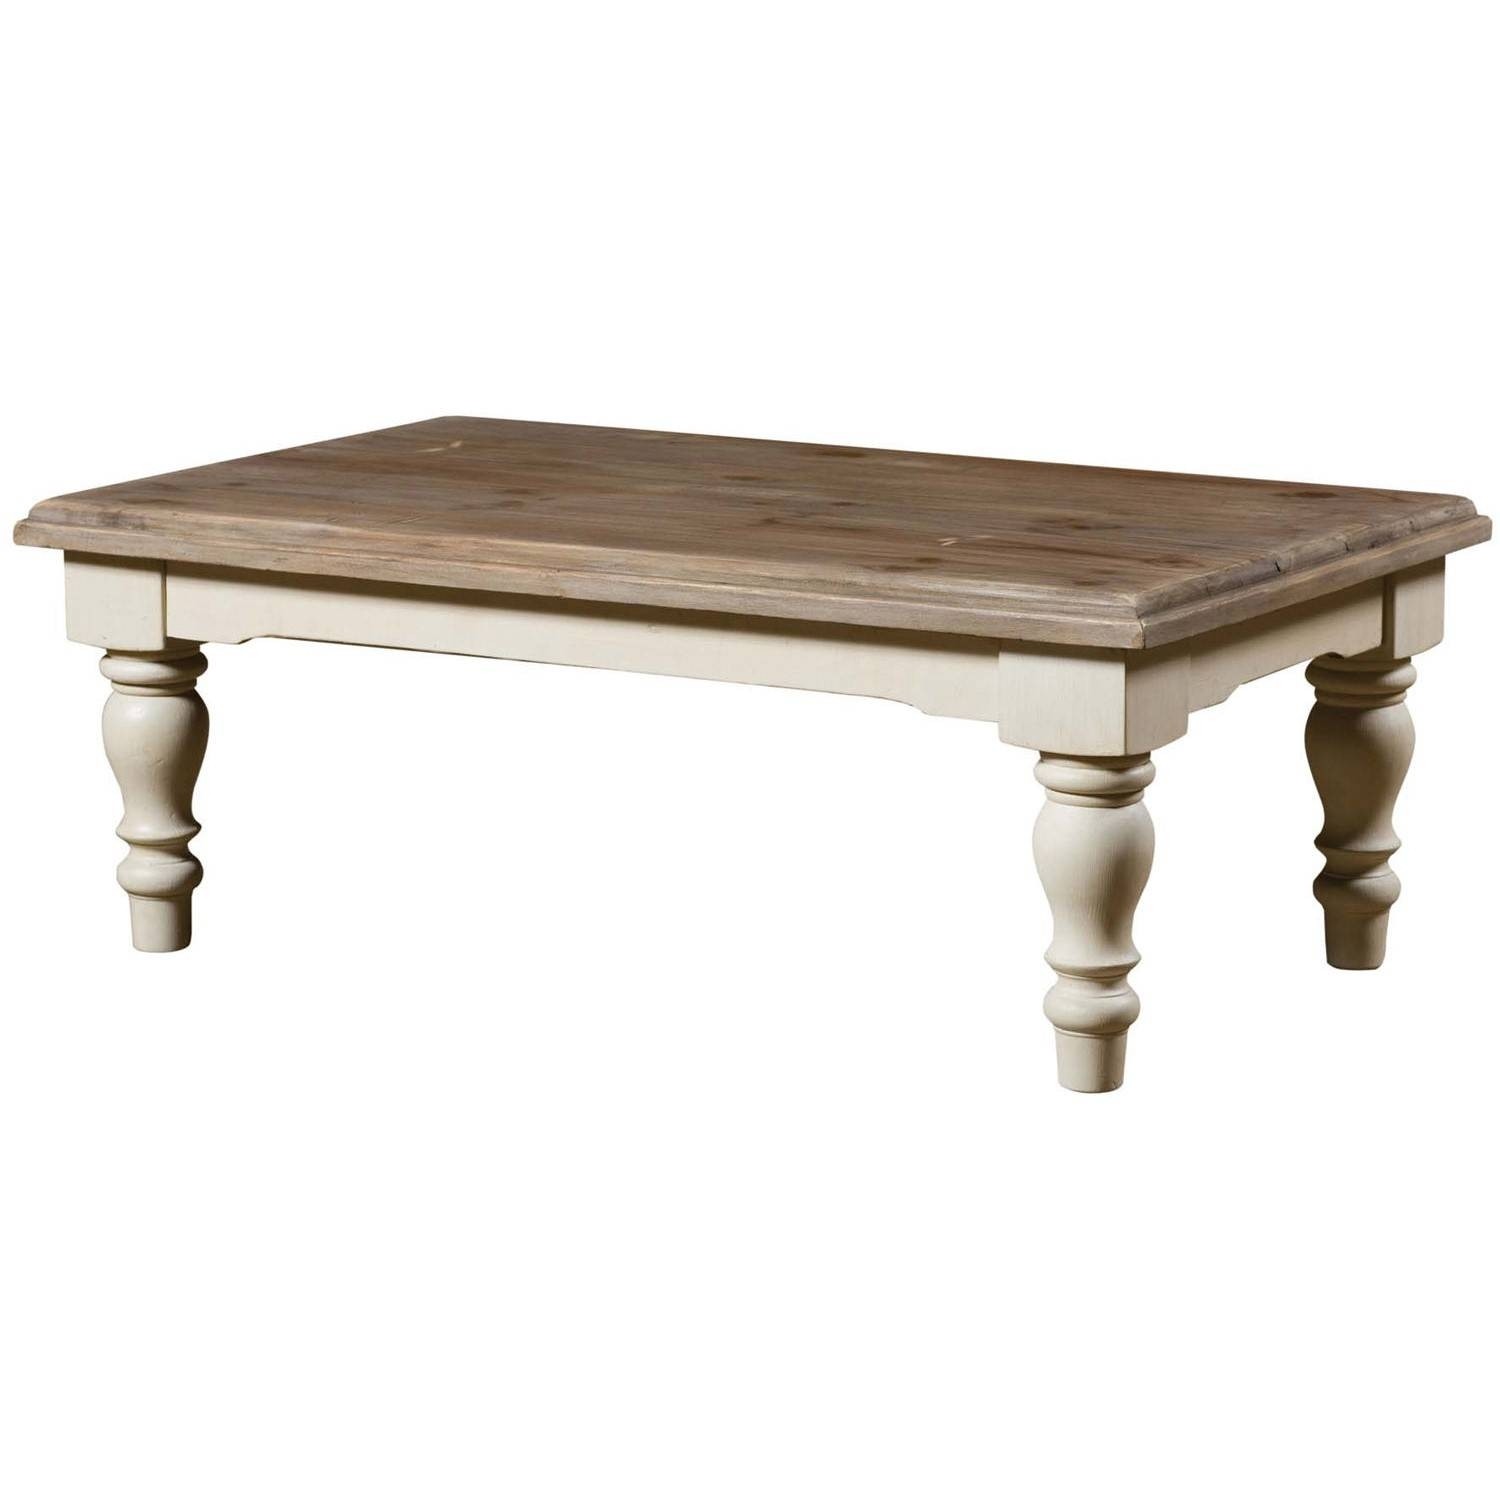 French country solid wood coffee table with turned legs